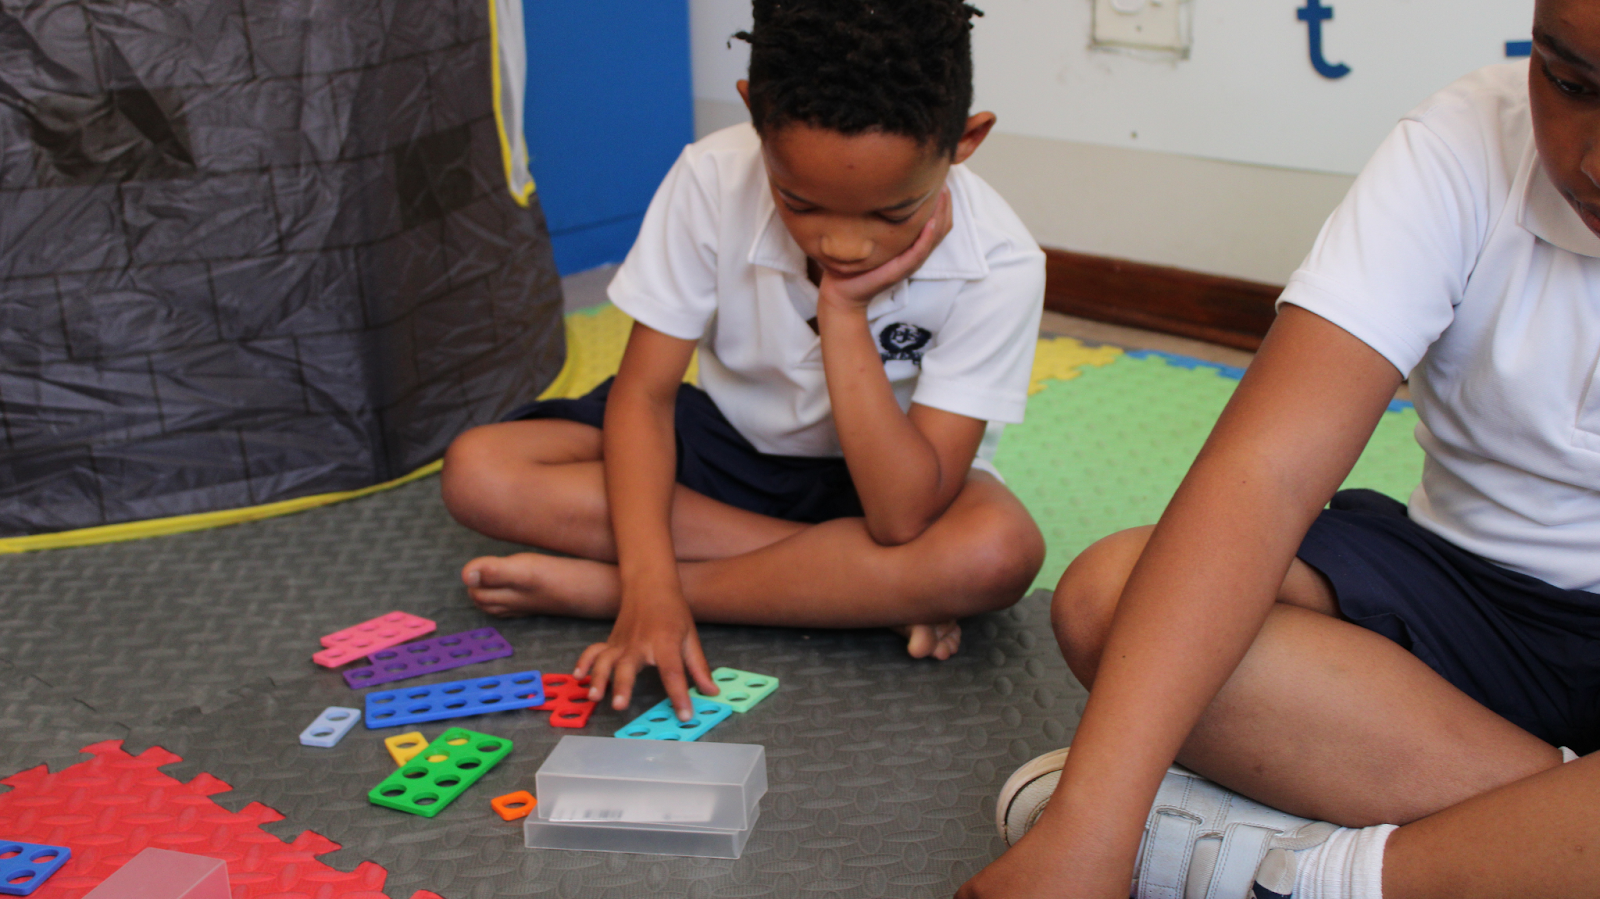 Identifying numbers with Numicon